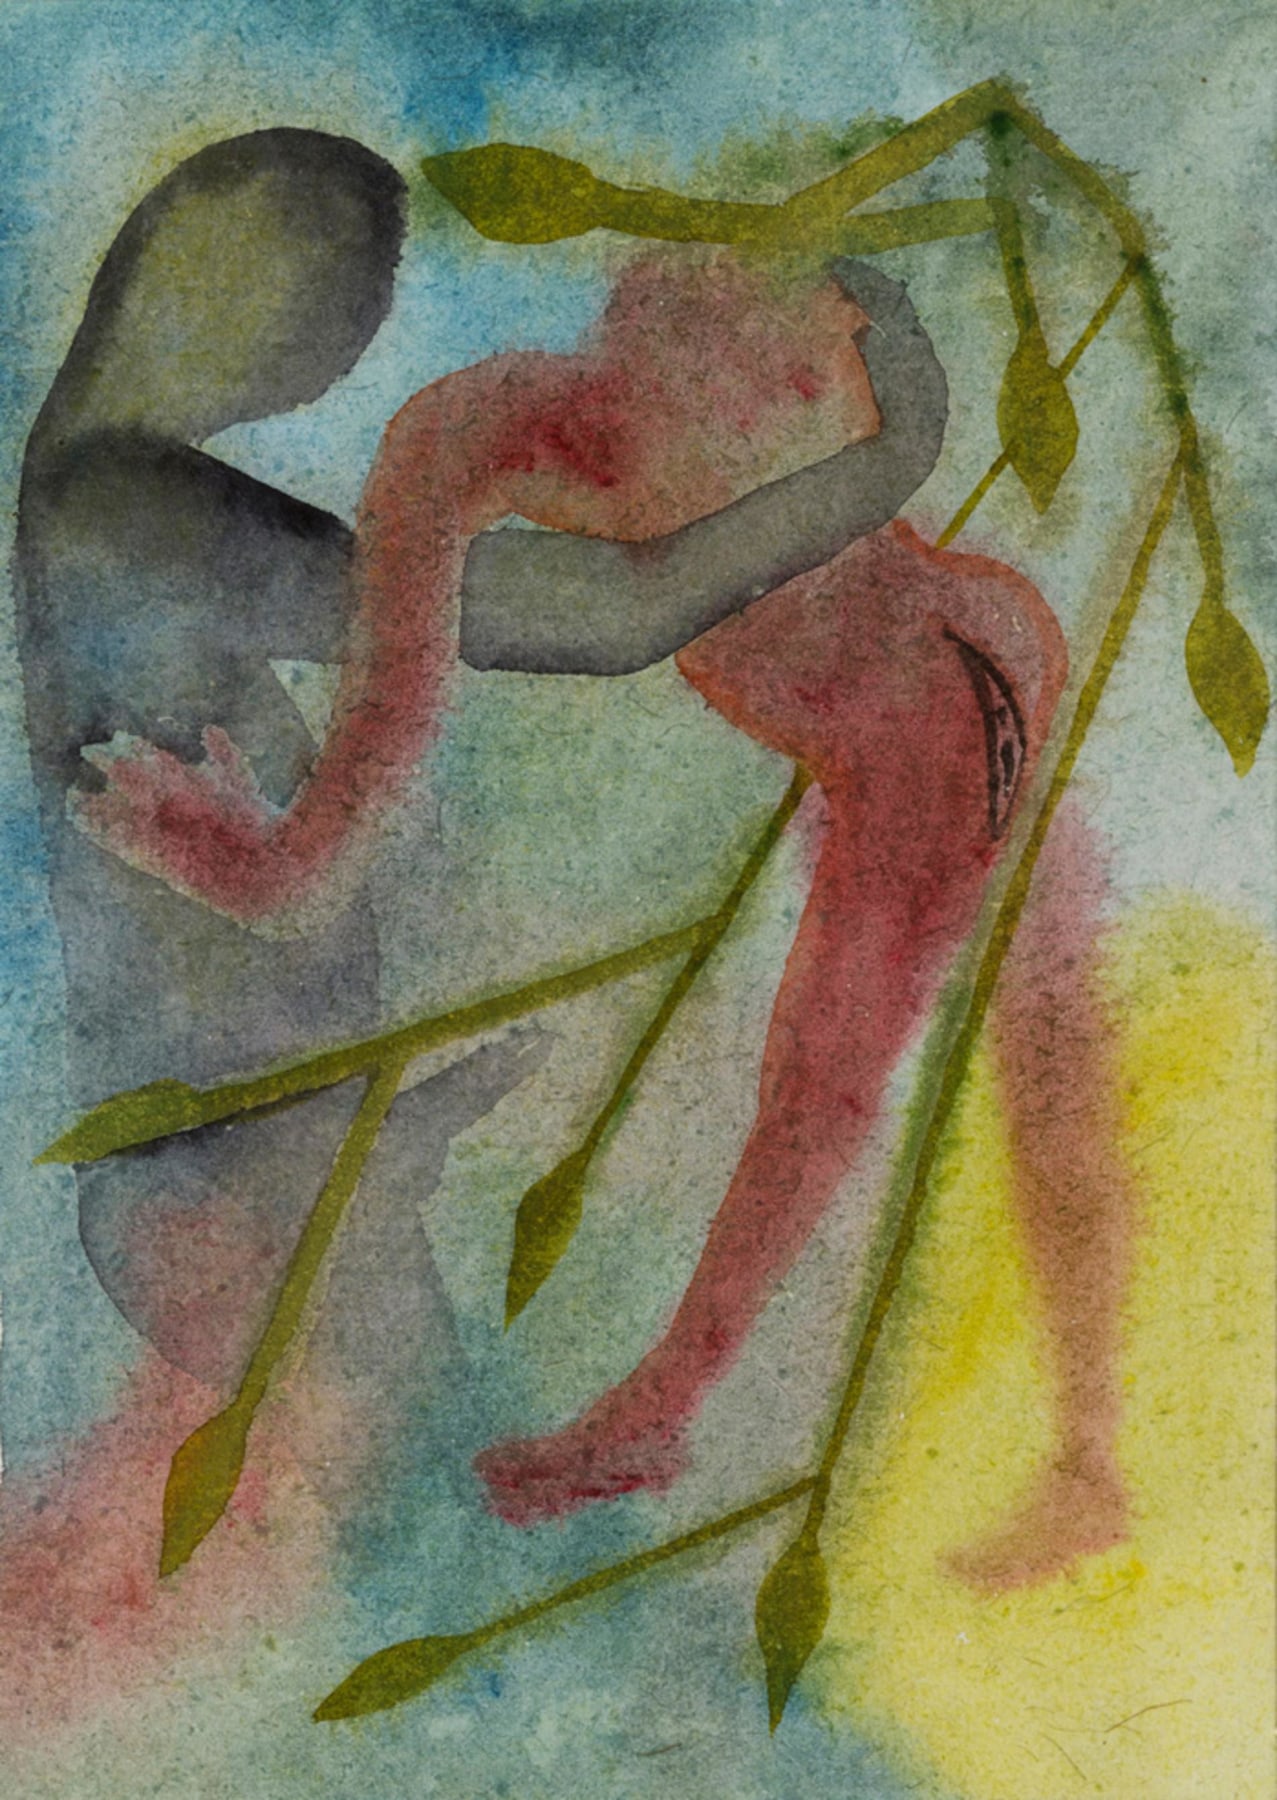 Image of FRANCESCO CLEMENTE's A Story Well Told (01), 2013